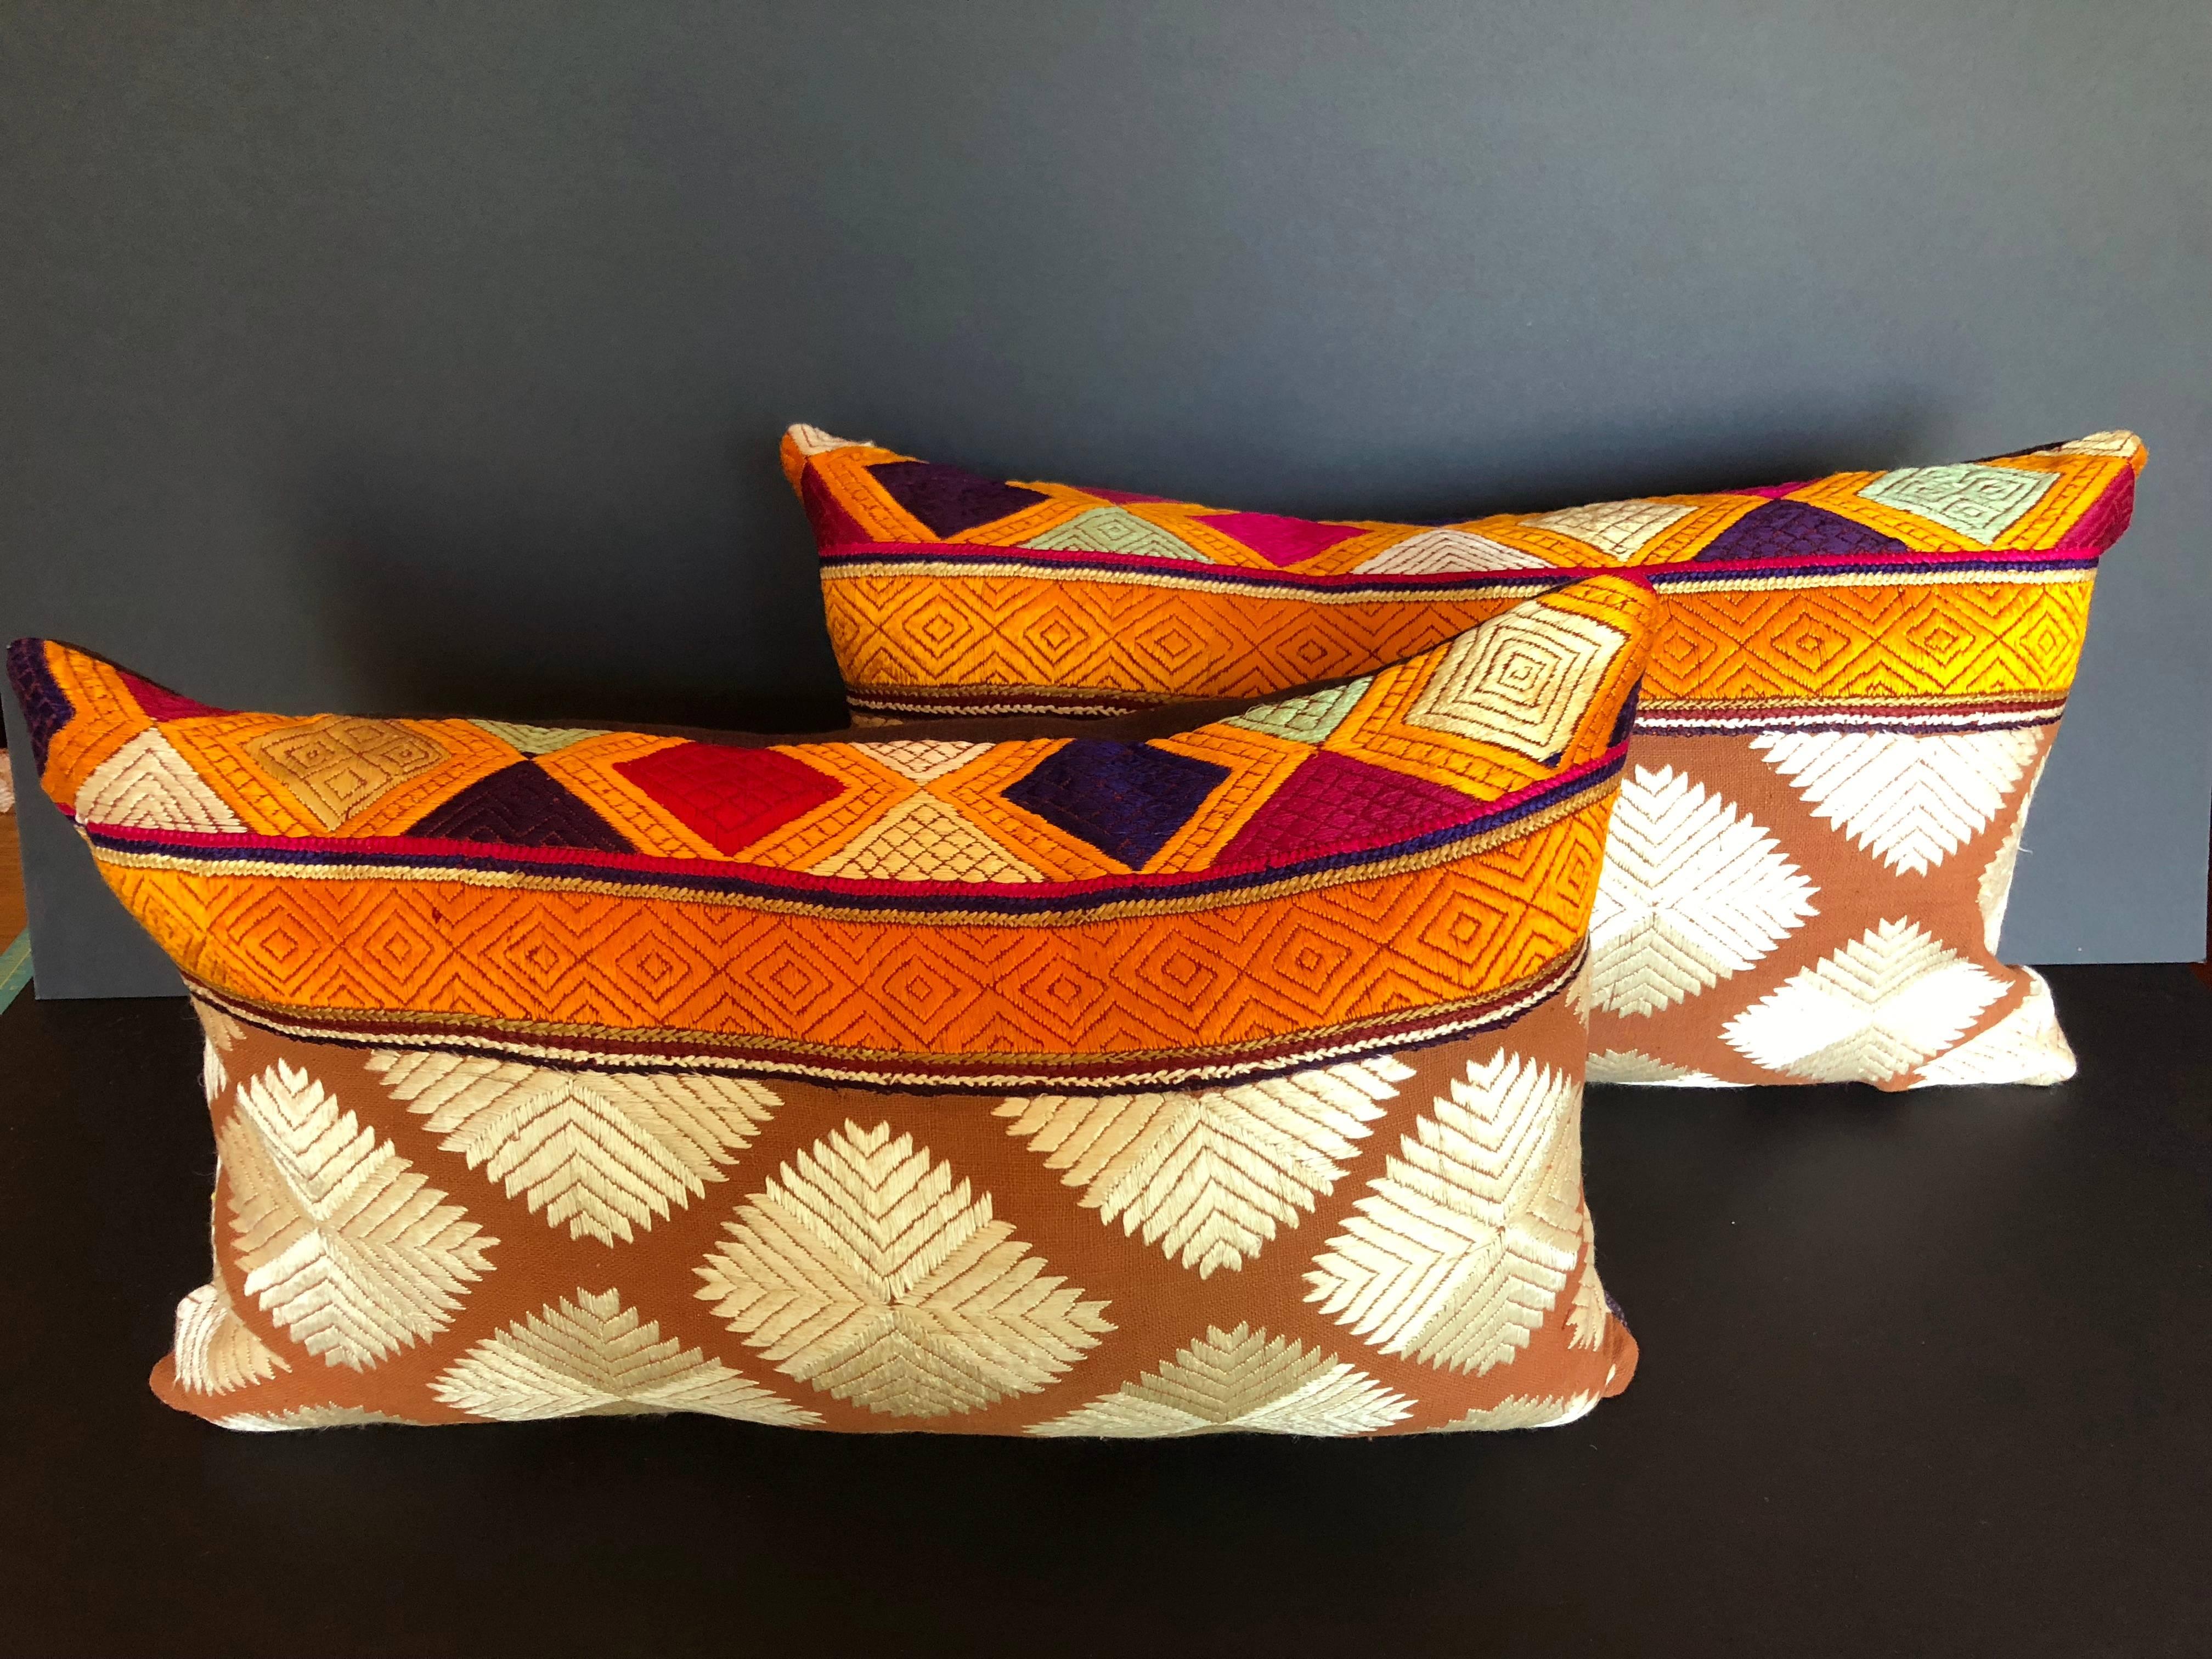 Custom pillows cut from a vintage Phulkari Bagh wedding shawl from Punjab, India. The hand loomed cotton khadi cloth is hand embroidered with silk threads in vibrant colors. Pillows are backed in a dark purple linen, filled with an insert of 50/50